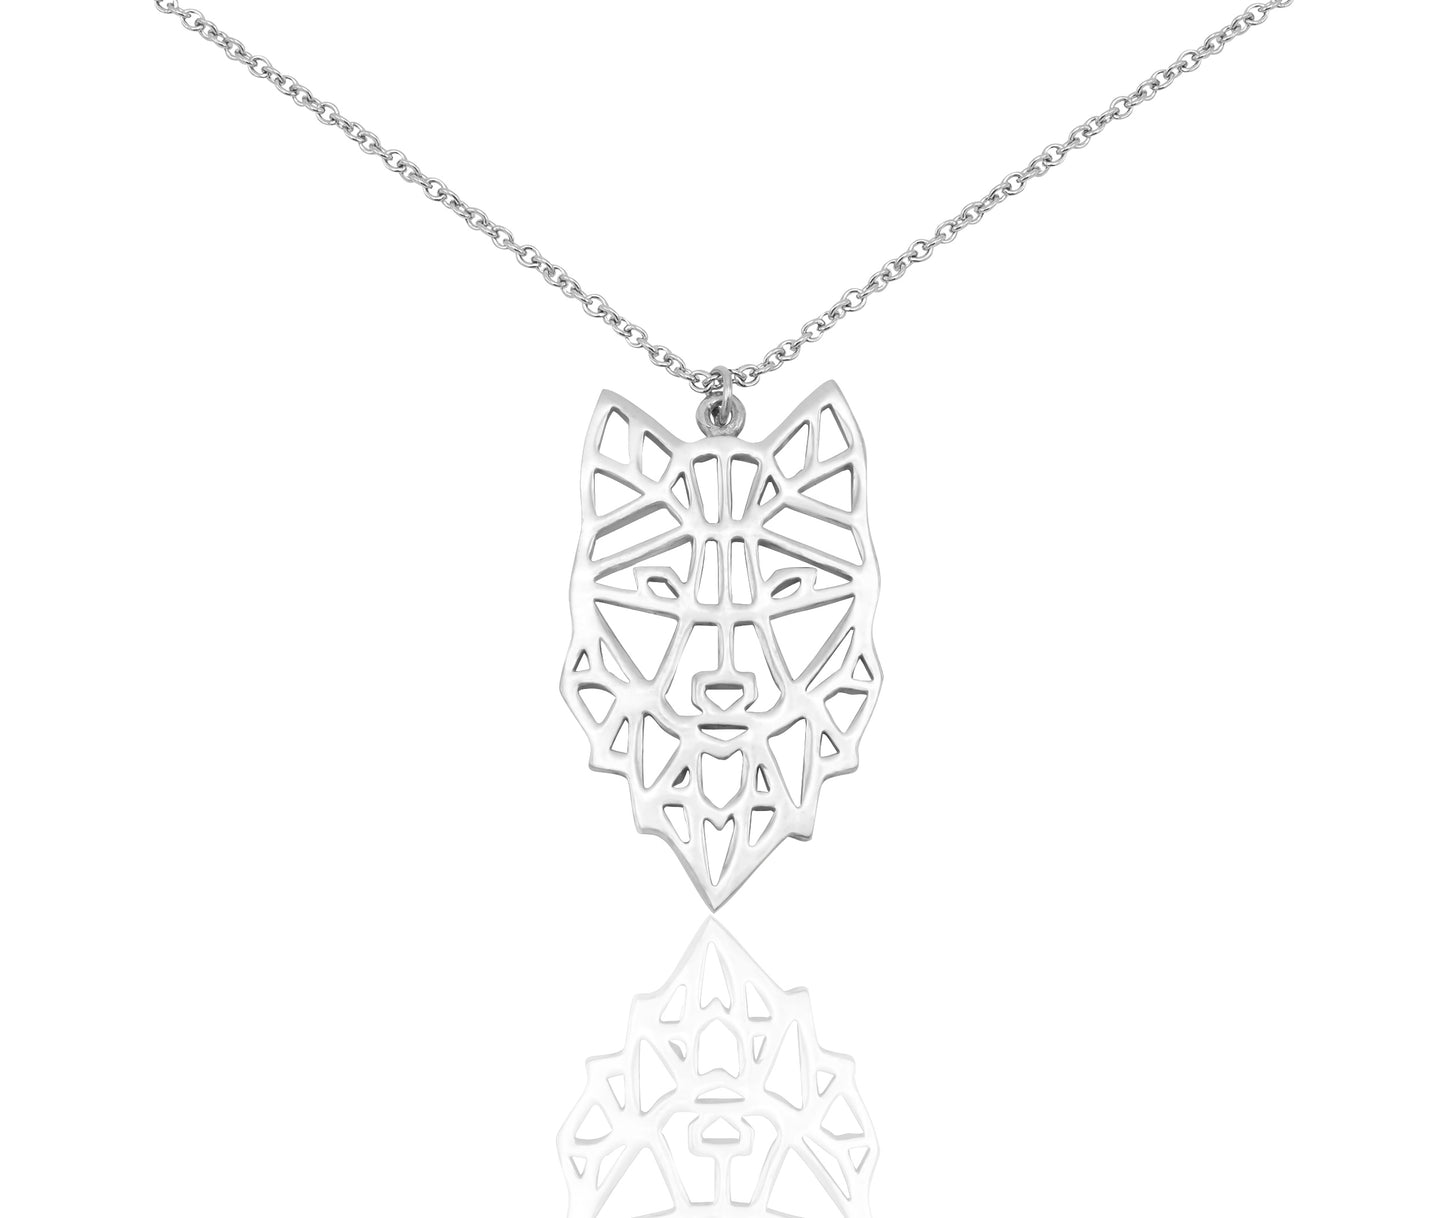 Quinnlyn & Co. Wolf Pendant Necklace, Encouragement Gifts for Women with Inspirational Quote on Greeting Card